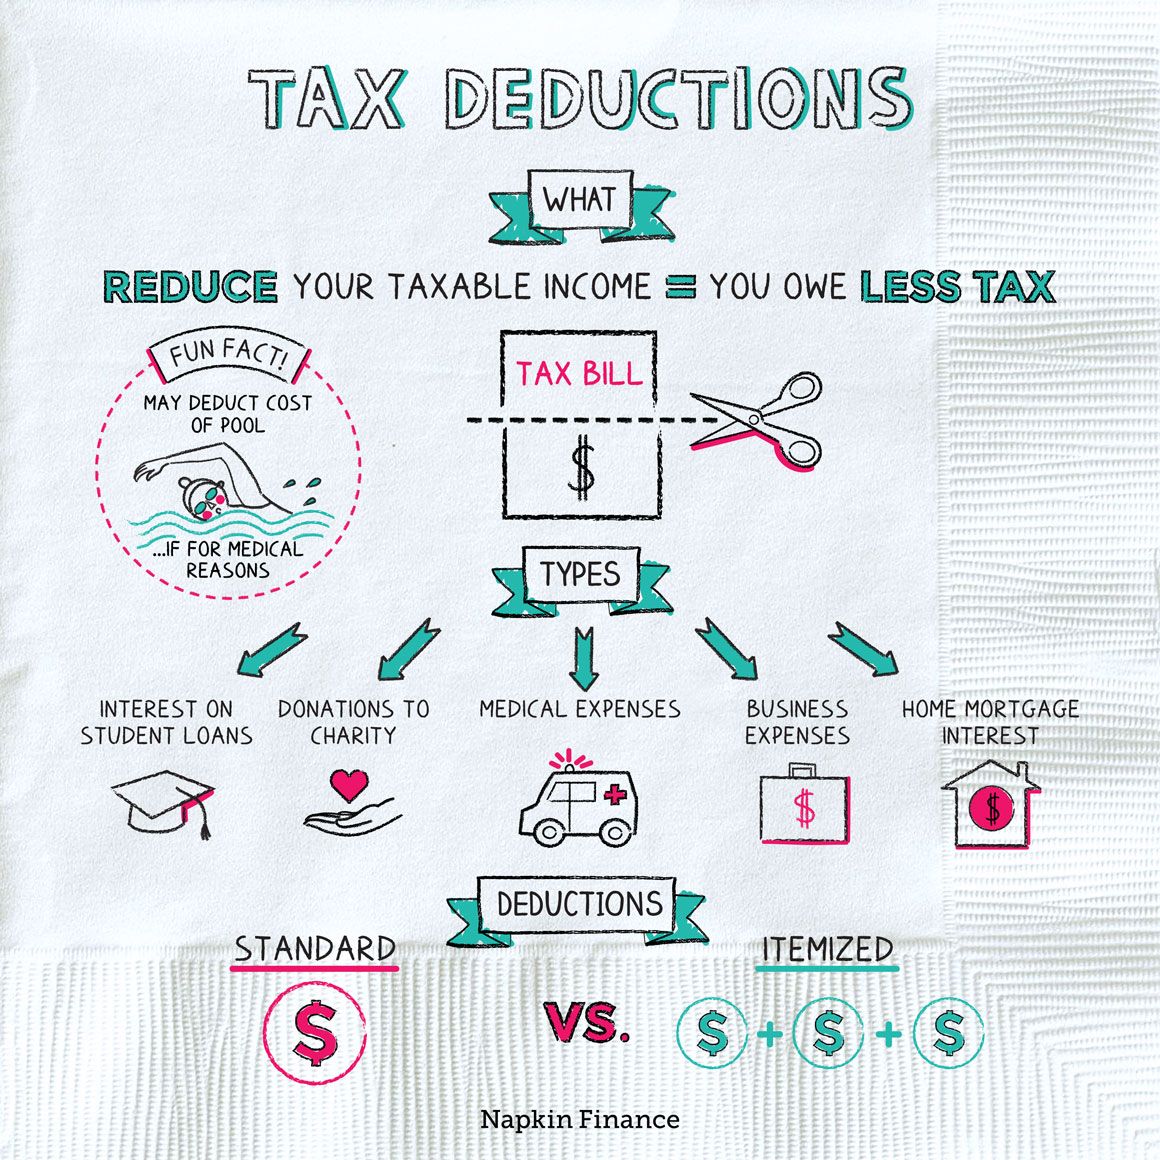 What Does Tax Deductible Mean and What Are Common Deductions